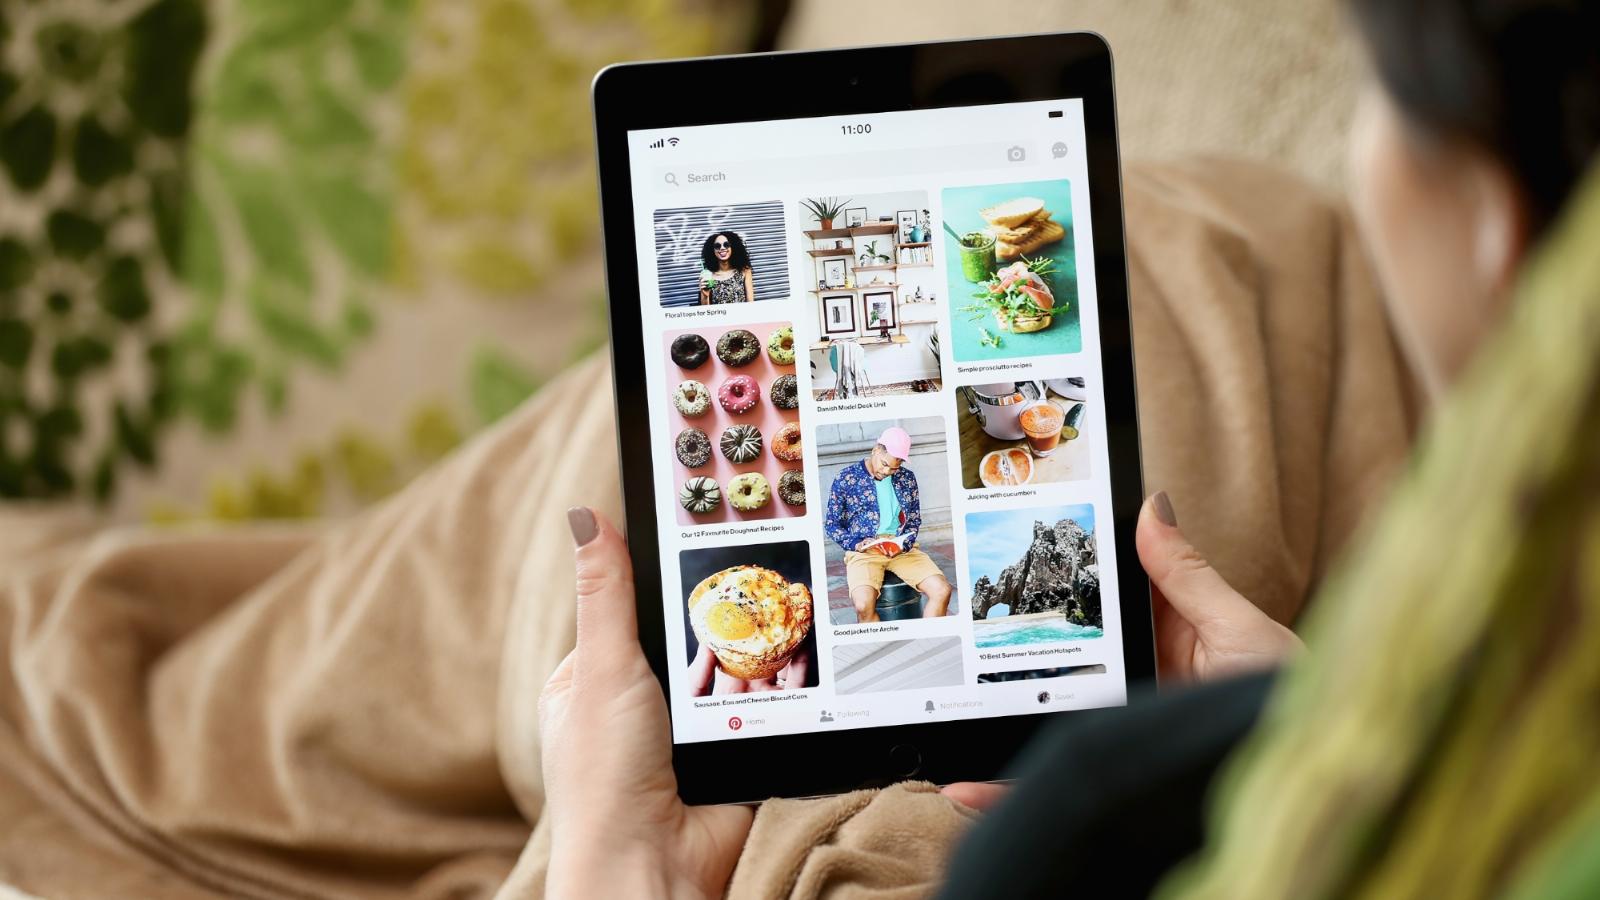 Pinterest reaches 450 million monthly users, will focus on making videos ‘shoppable’